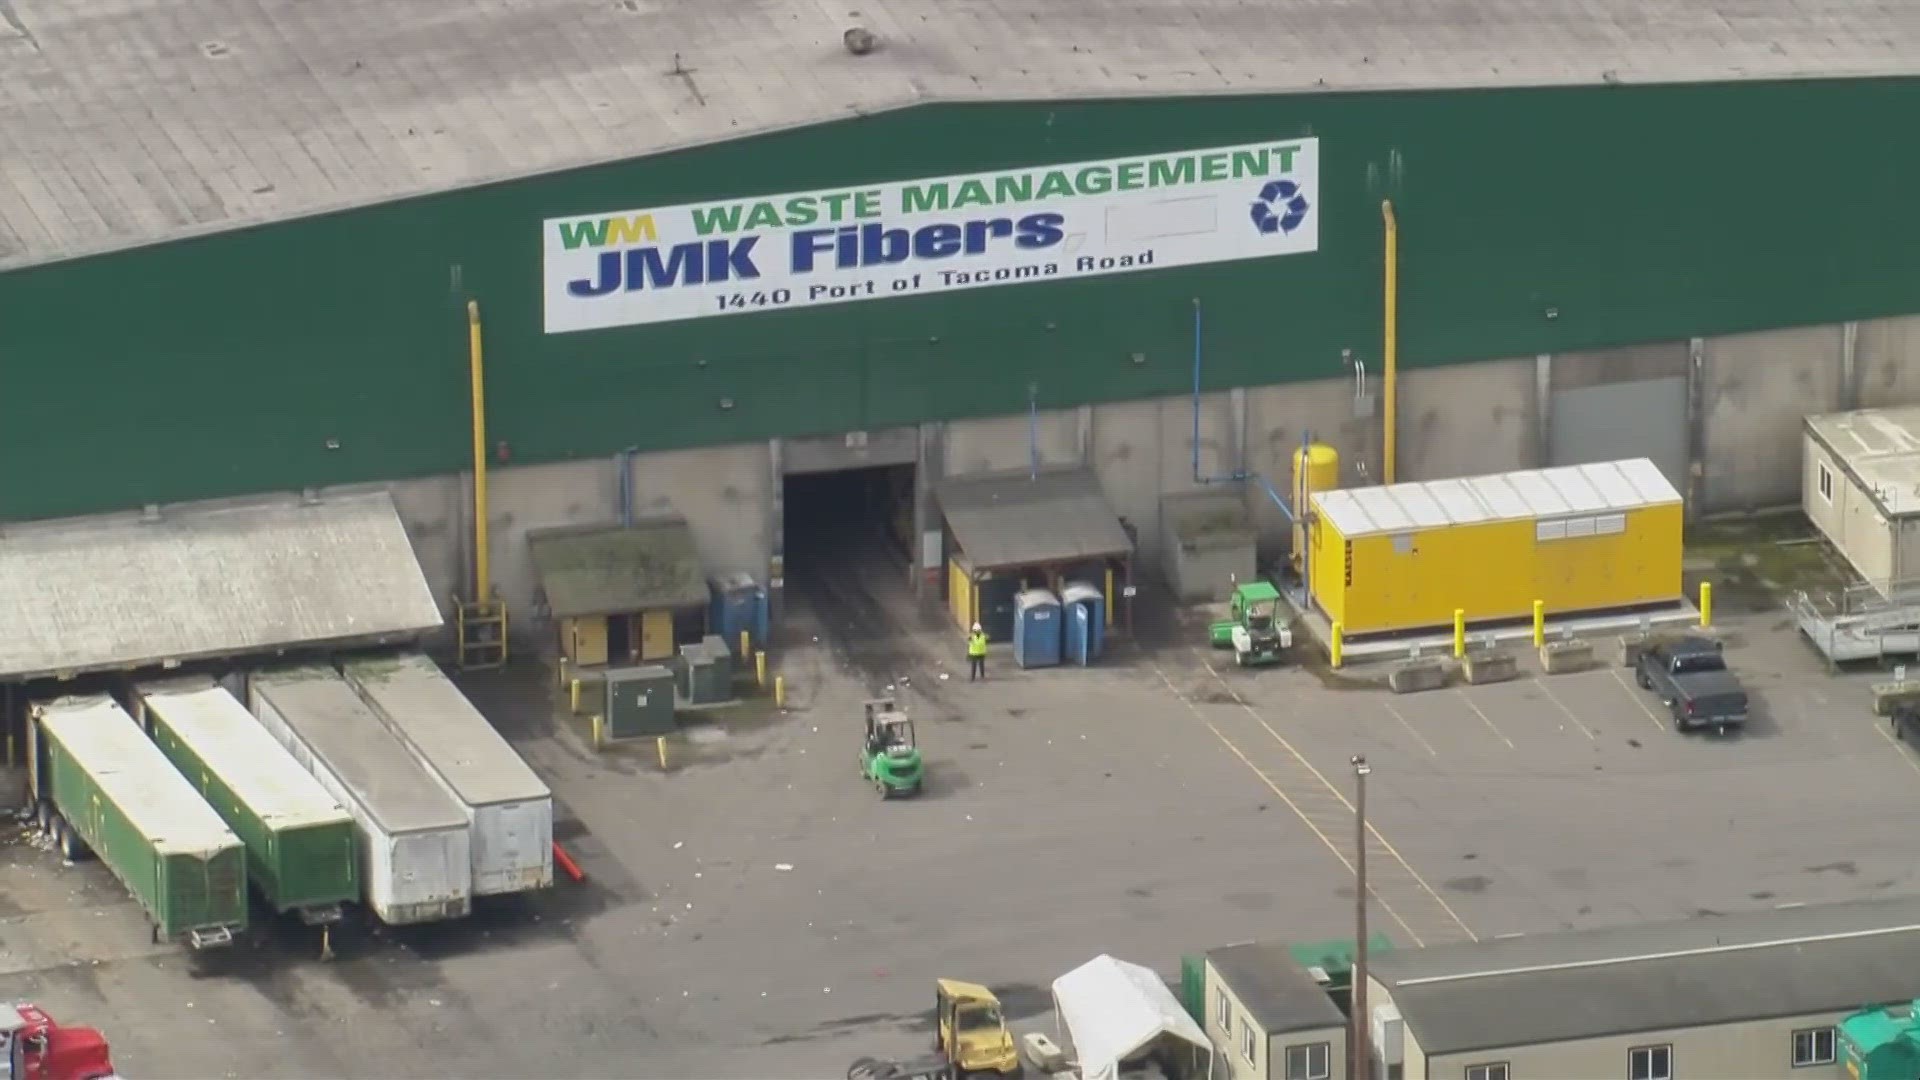 Waste Management JMK Fibers confirmed that a body was discovered on April 15, three days after another body was found at the plant.